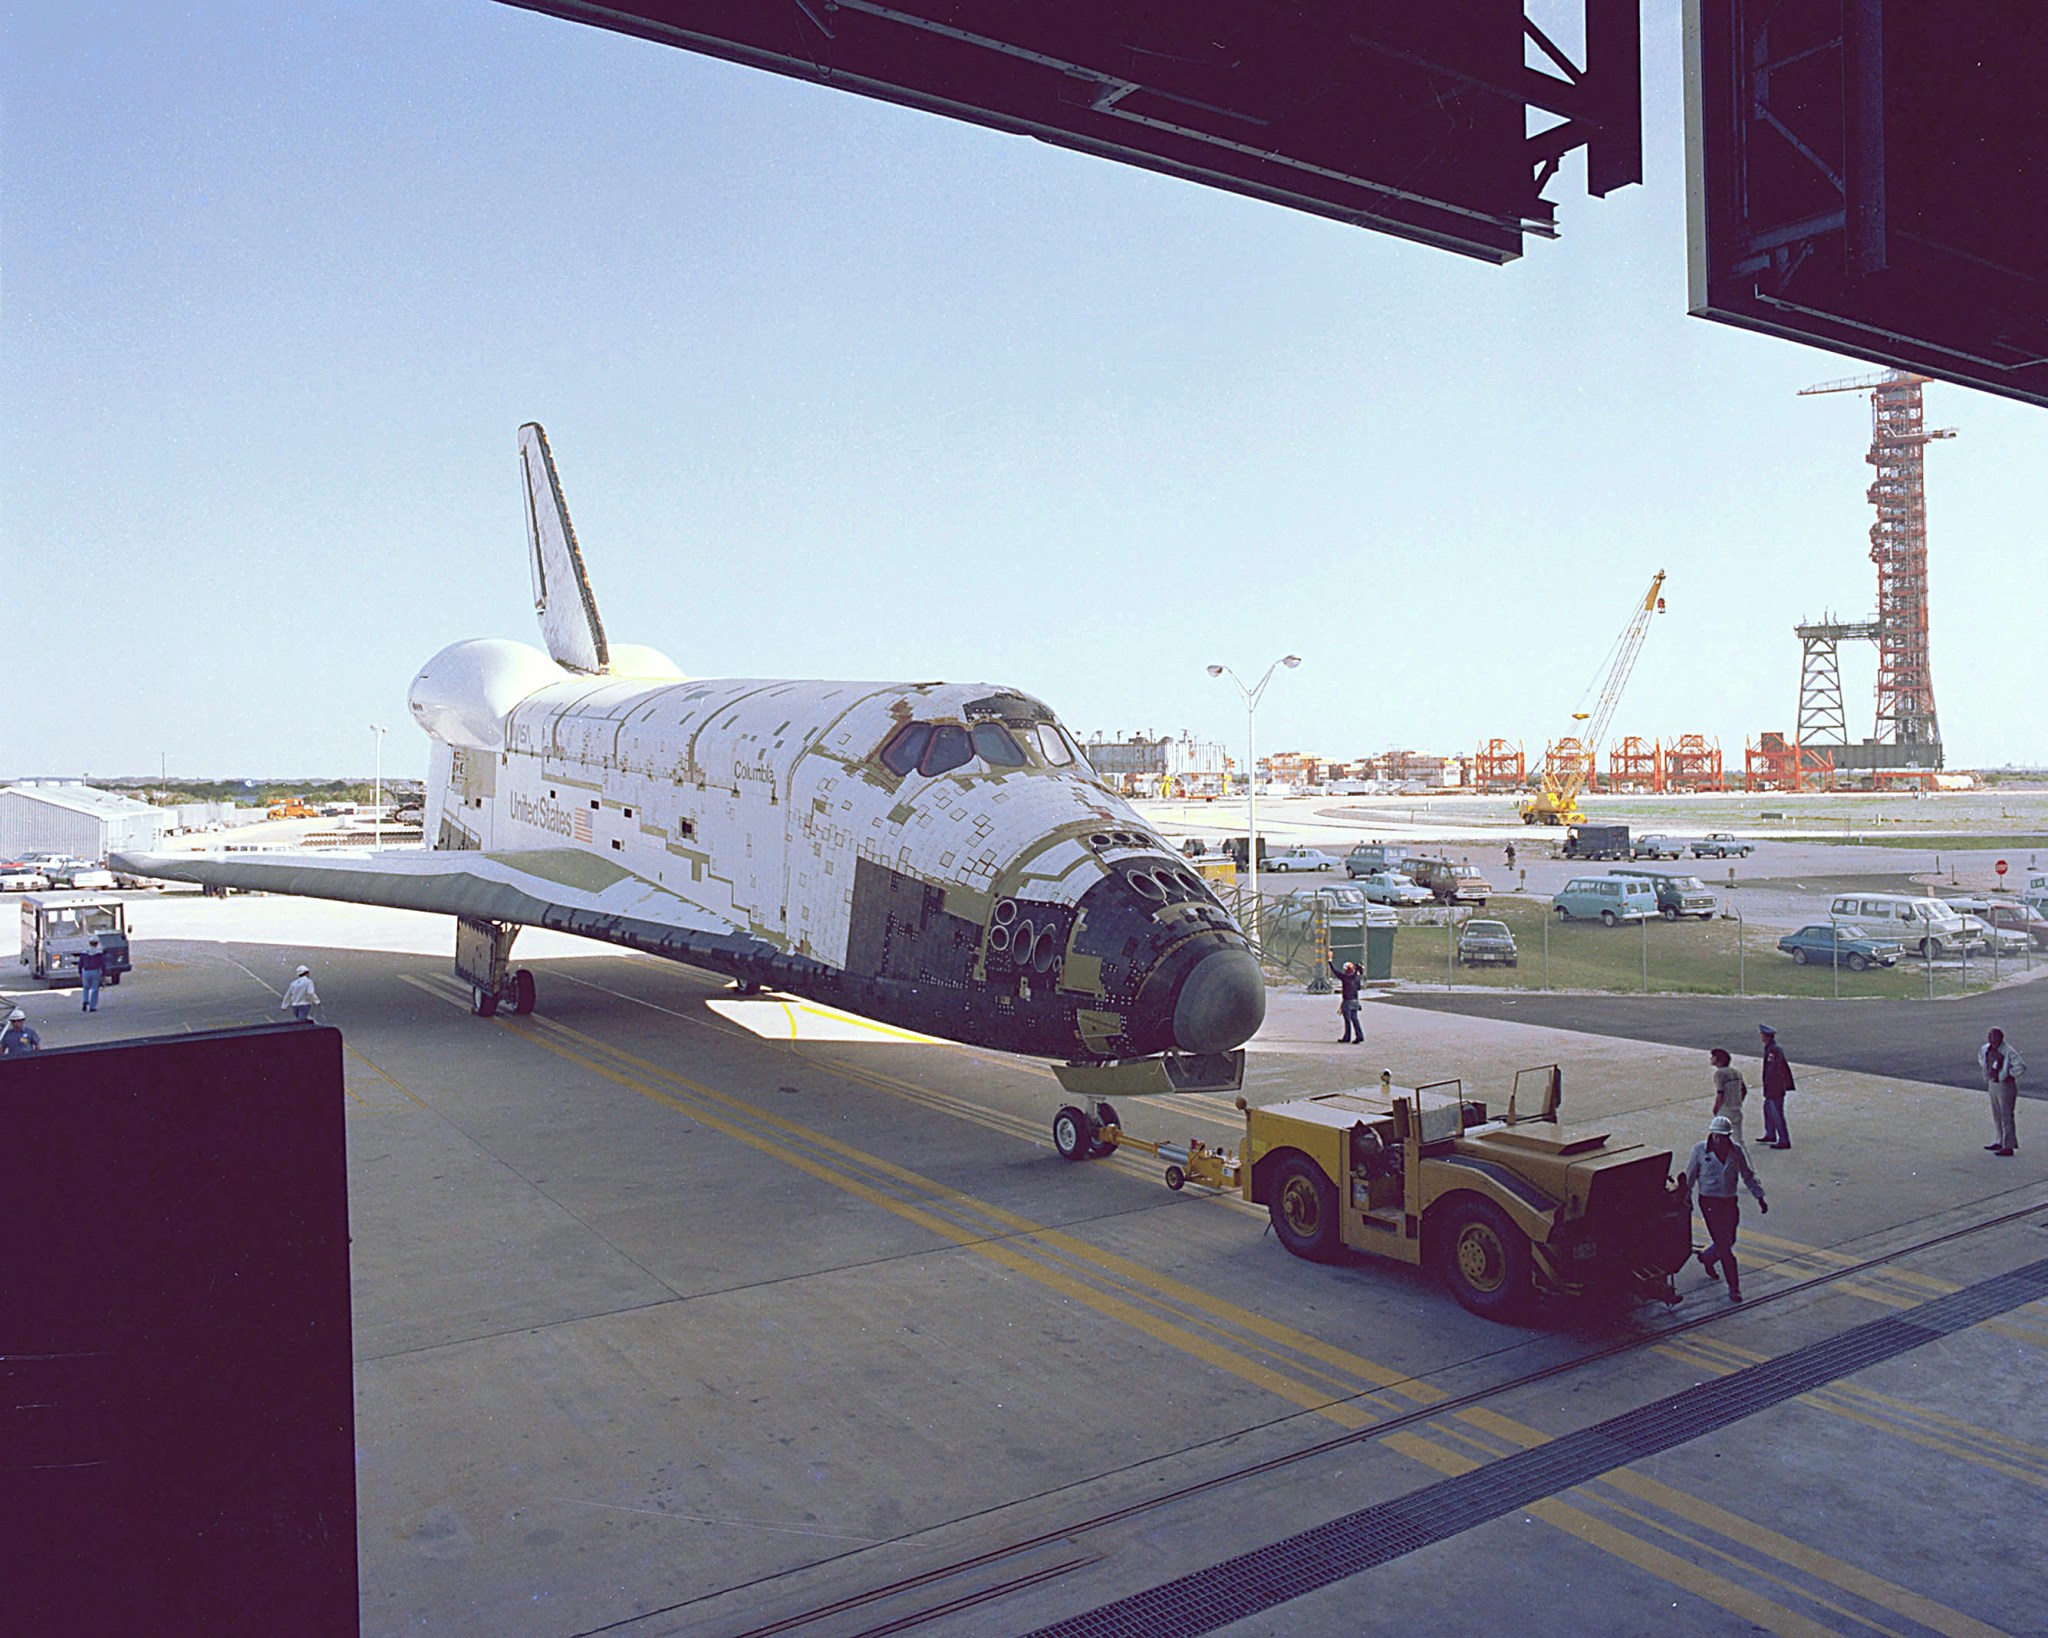 Space Shuttle Columbia is towed into an orbiter processing facility in 1979.